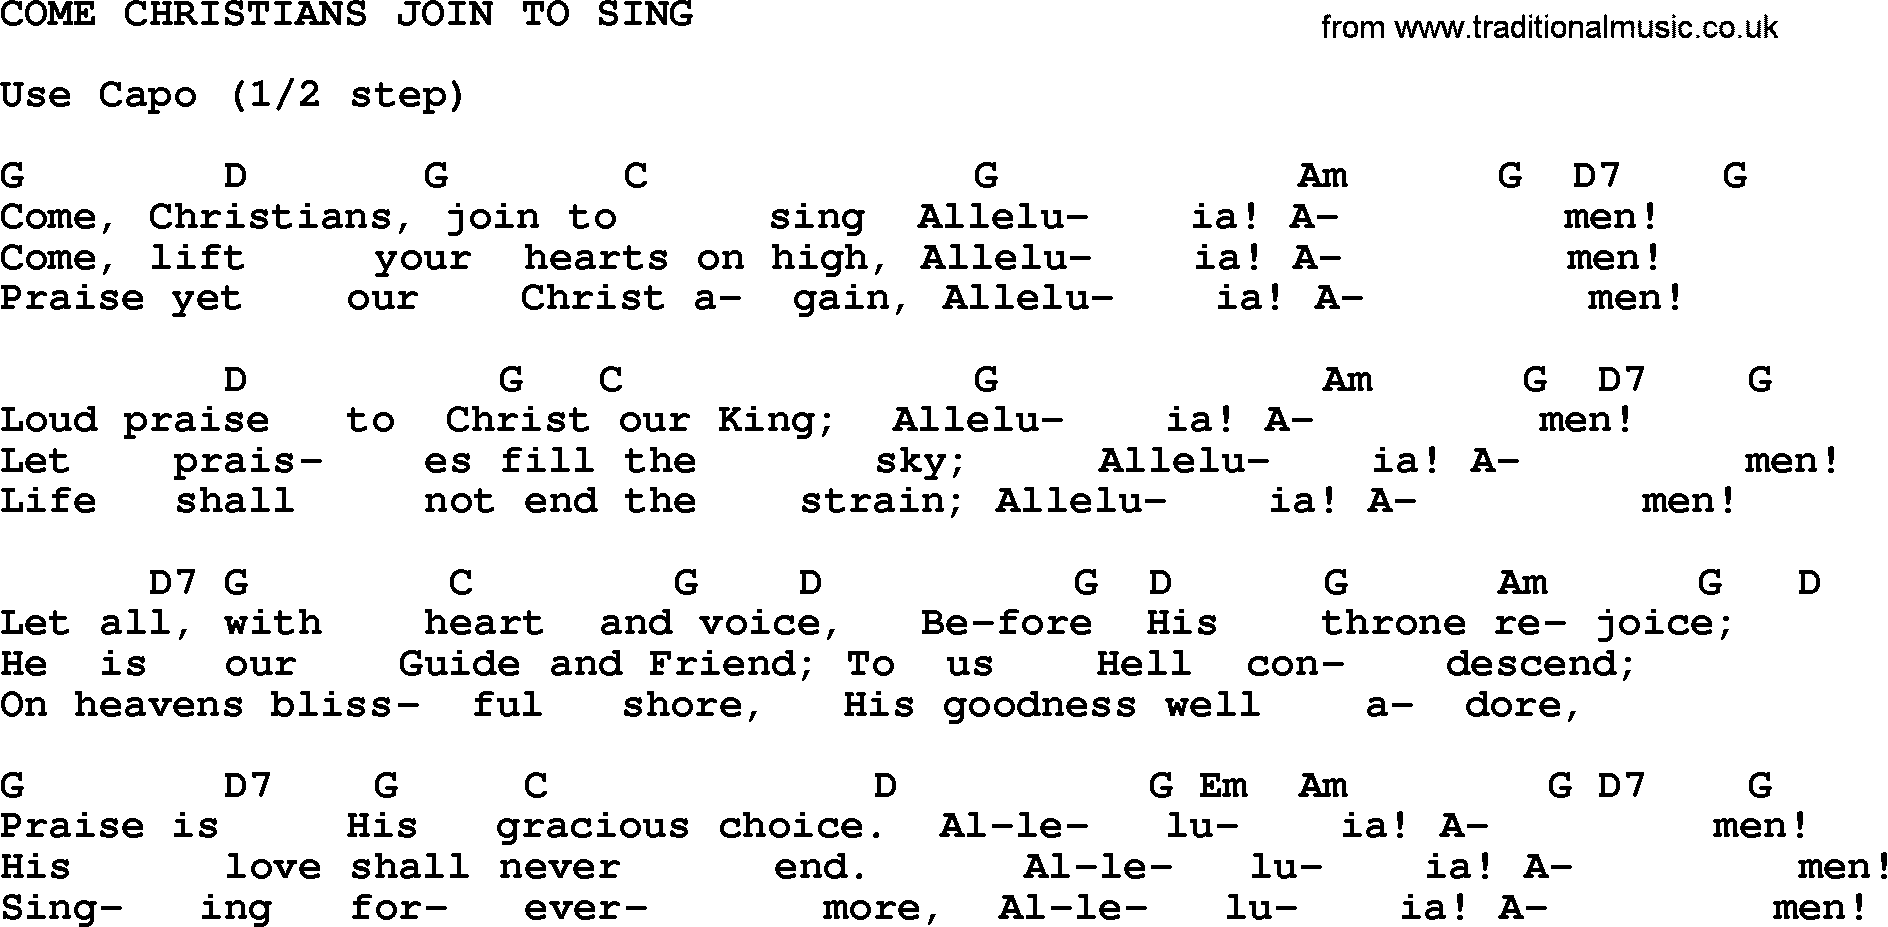 Gospel Song: Come Christians Join To Sing-Trad, lyrics and chords.